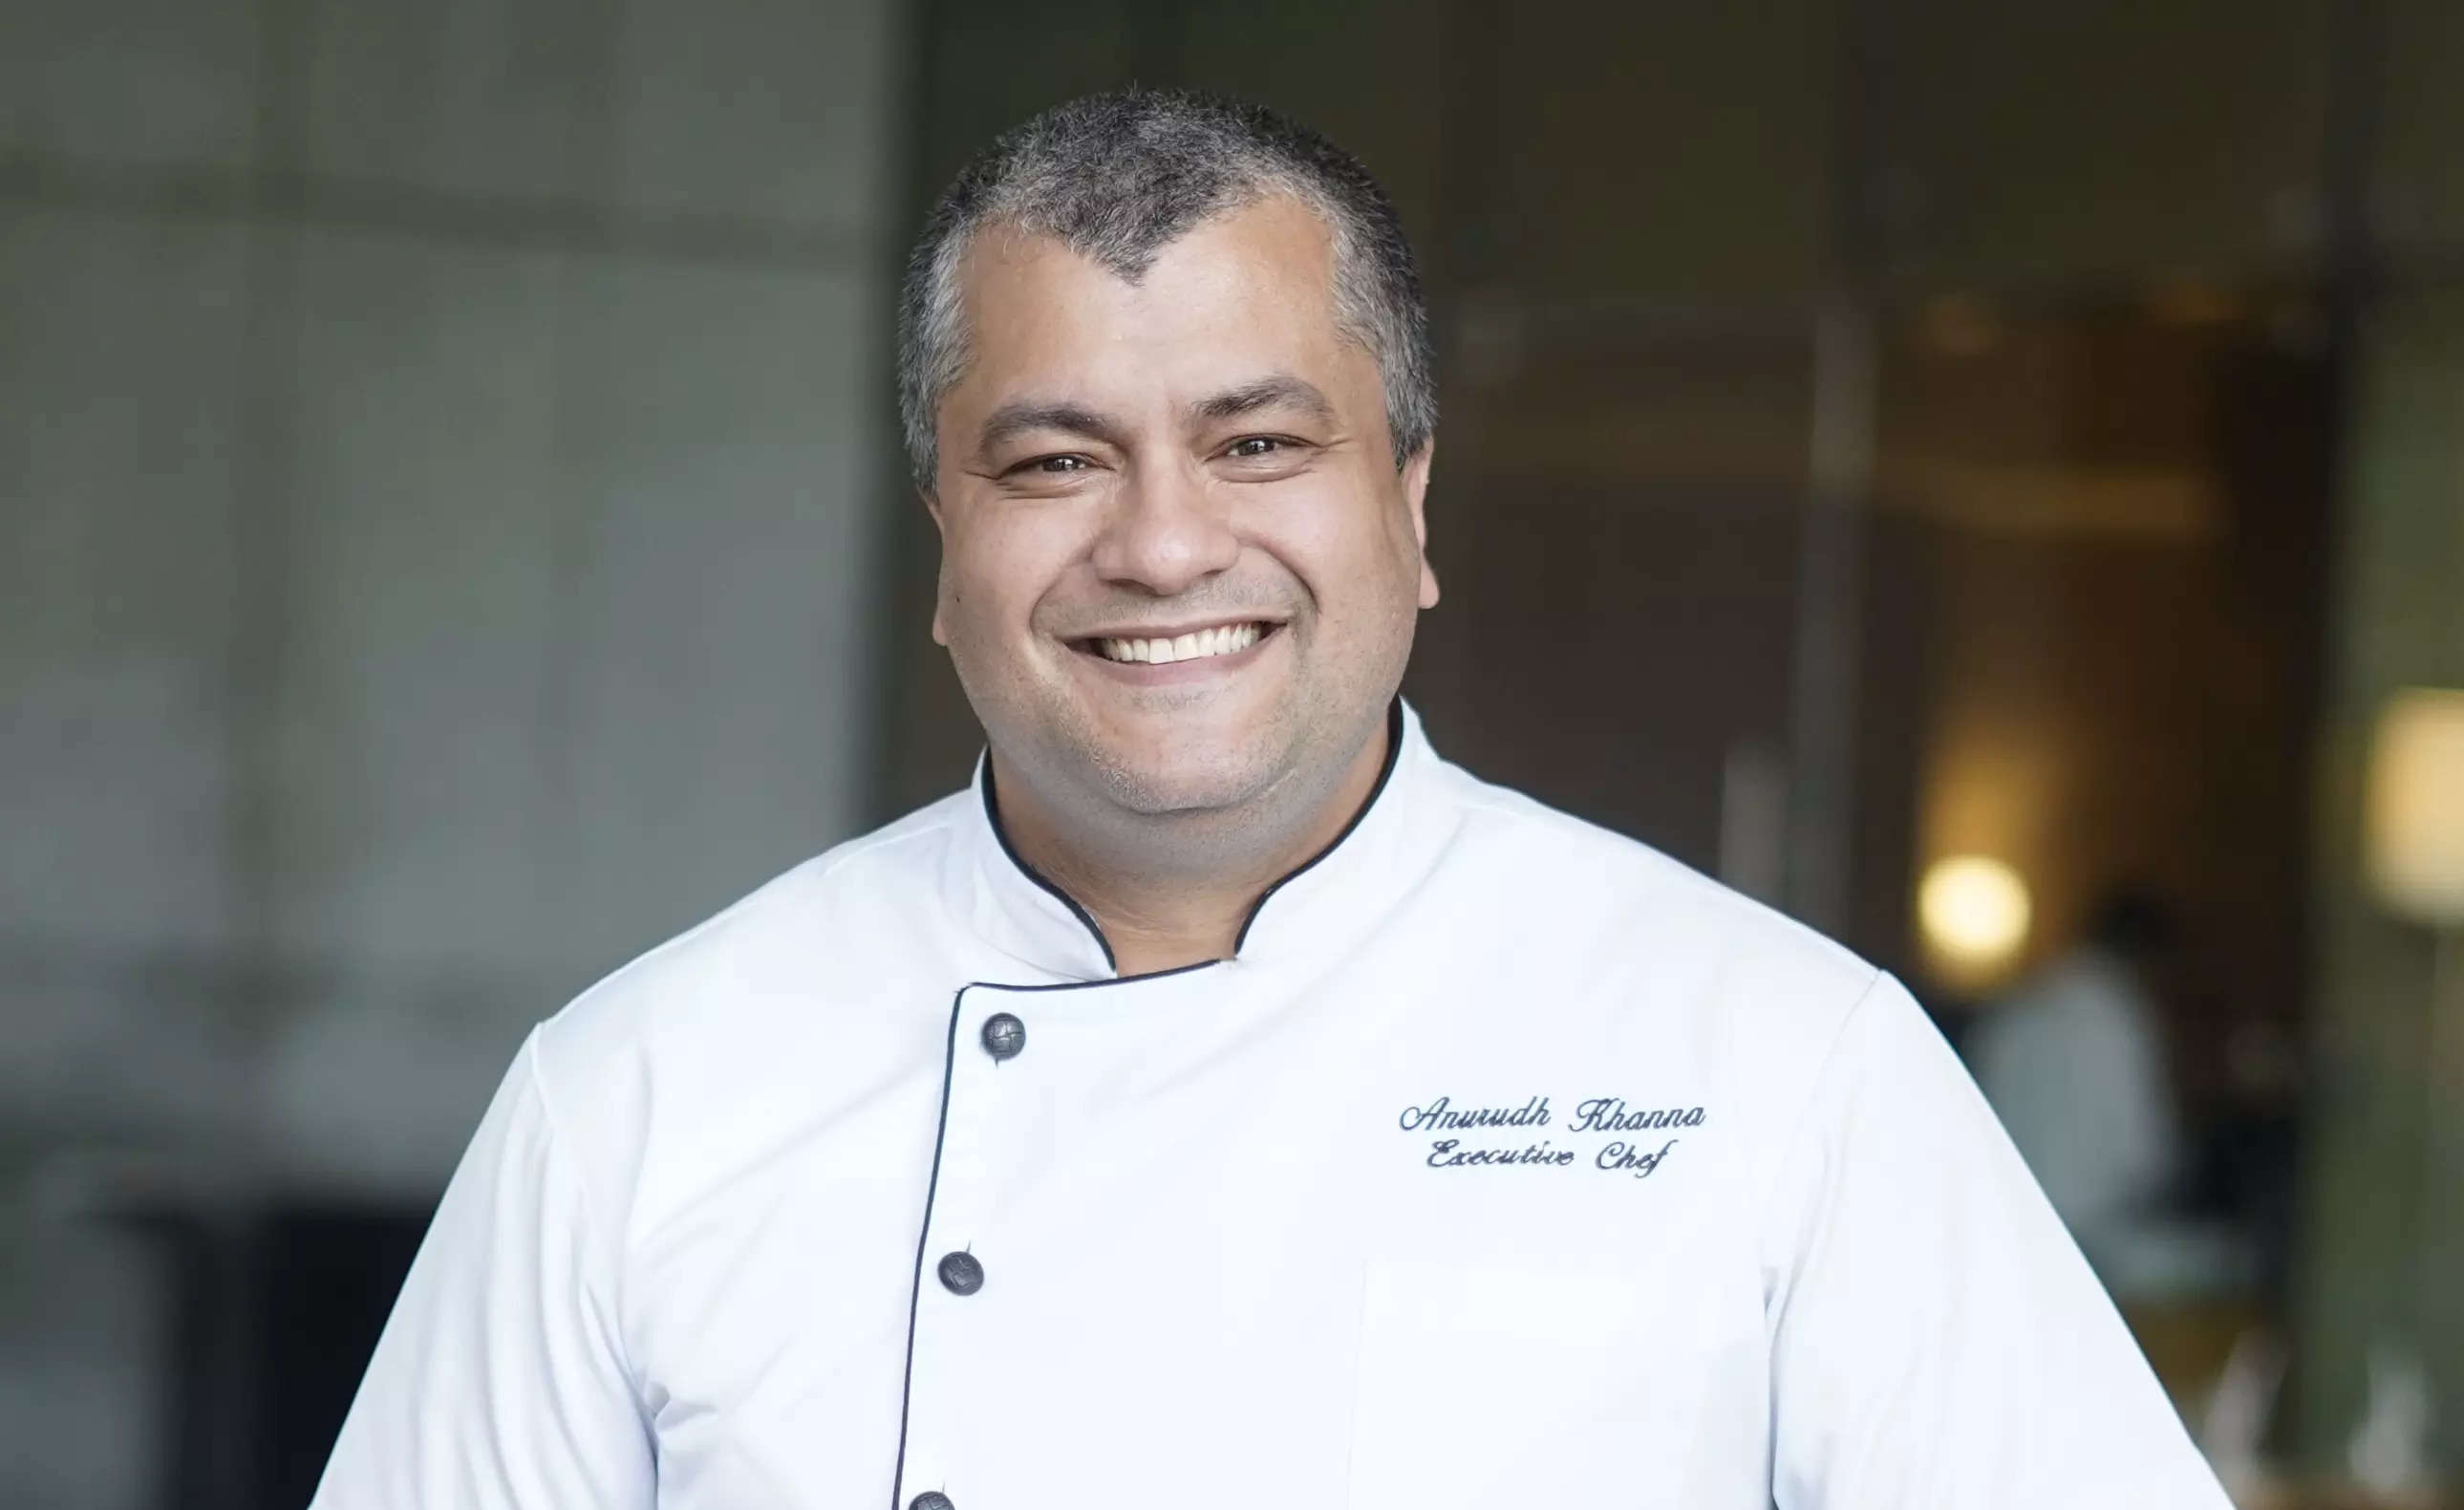     Chef Anurud Khanna, multi-property executive chef at The Westin Gurgaon, New Delhi and The Westin Sohna Resort & Spa is bringing talent back to the kitchen. 